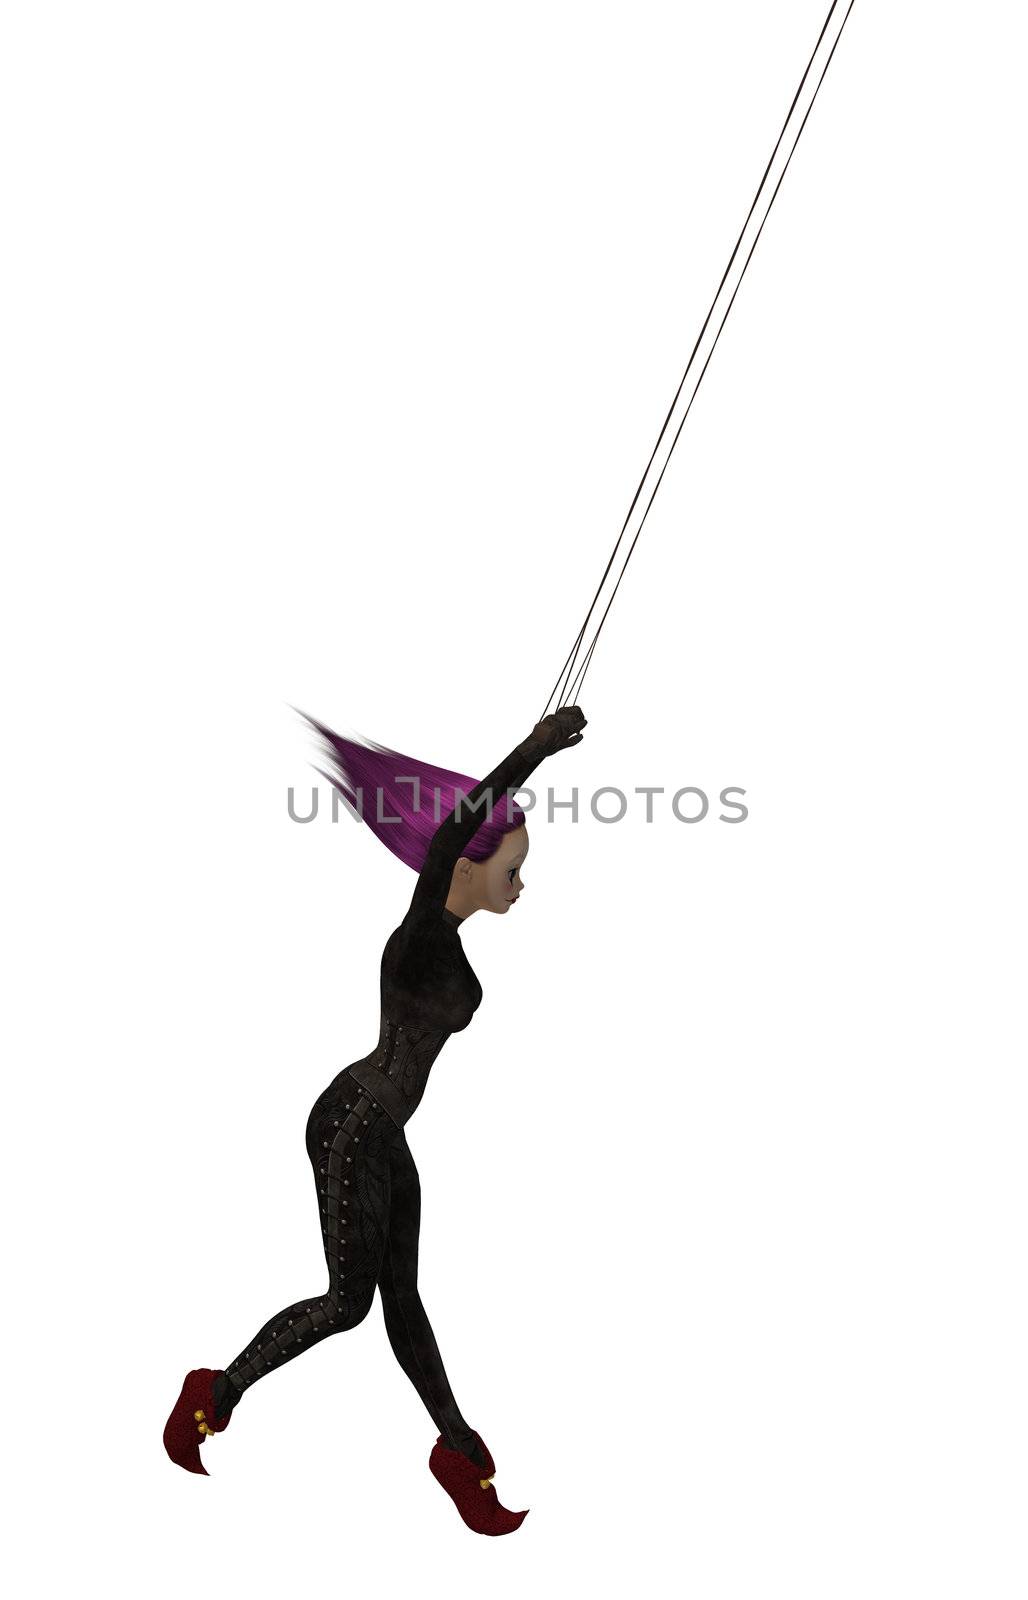 Clown handing on a trapeze on a white background